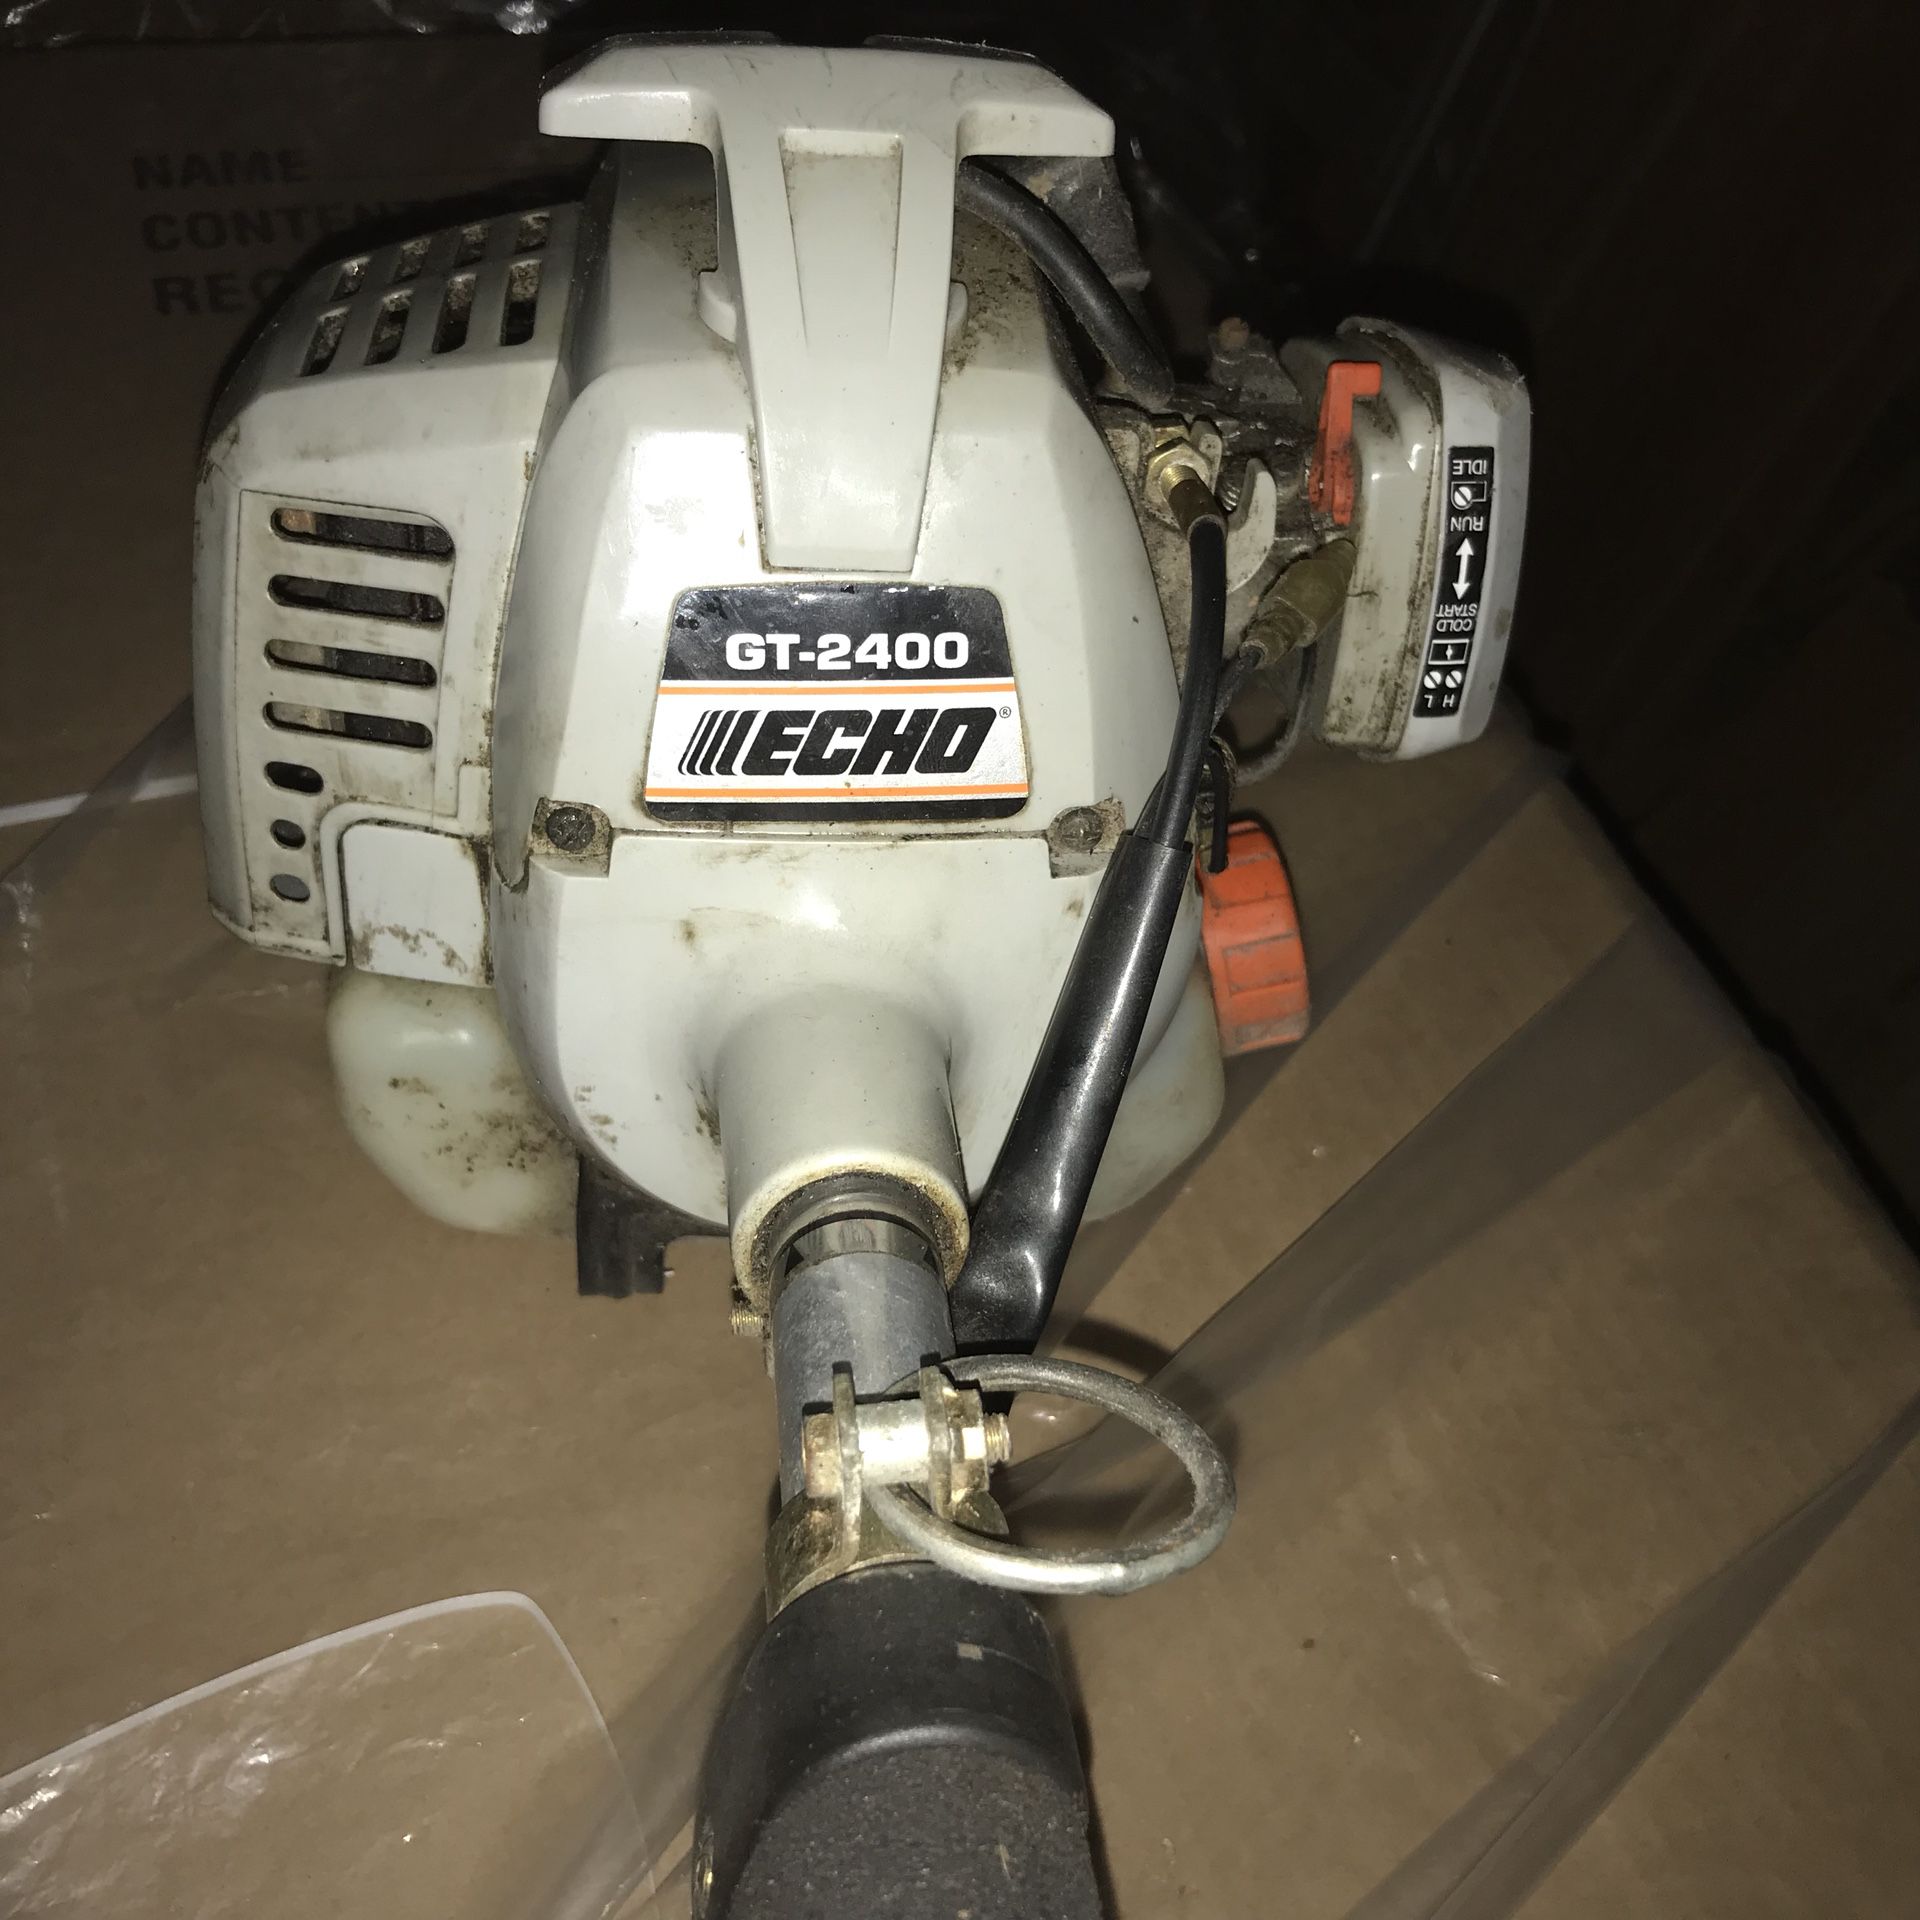 ECHO GAS POWERED GT-2400. IN GOOD WORKING CONDITION! PRICED TO SELL!